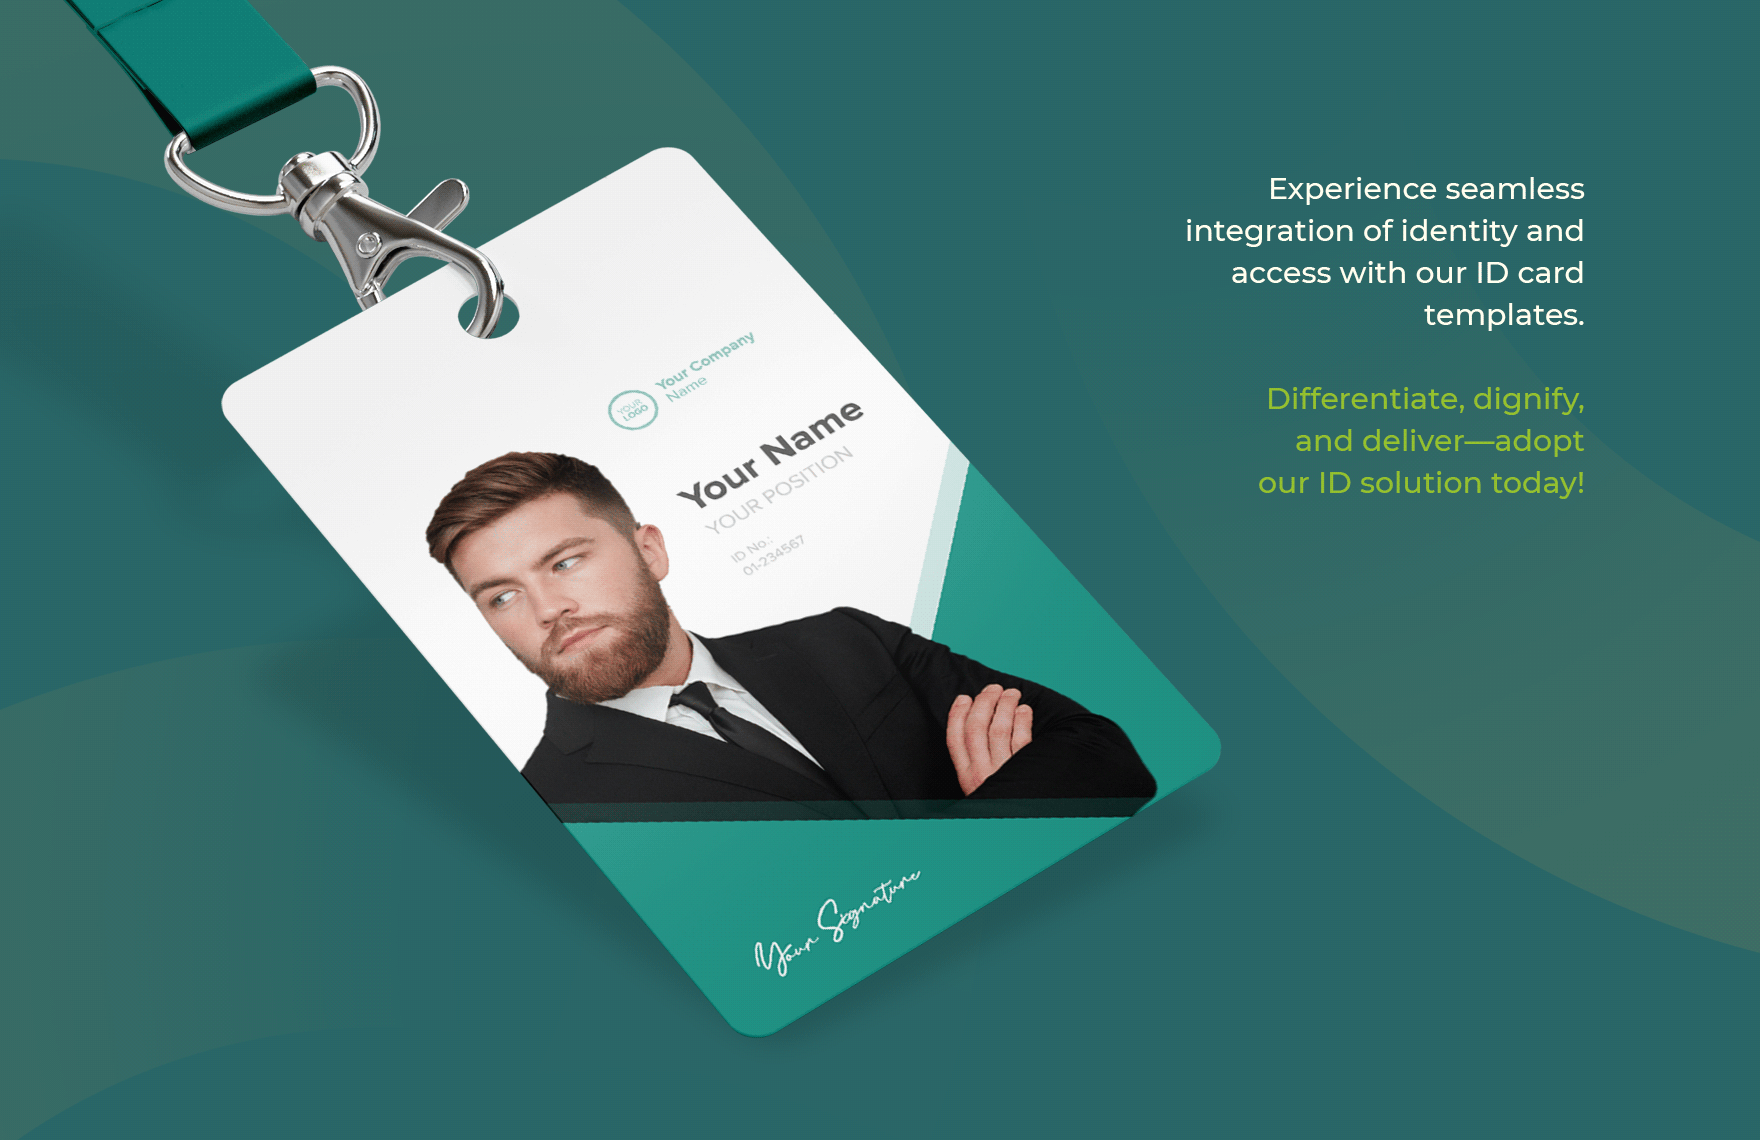 Supply Chain Manager ID Card Template